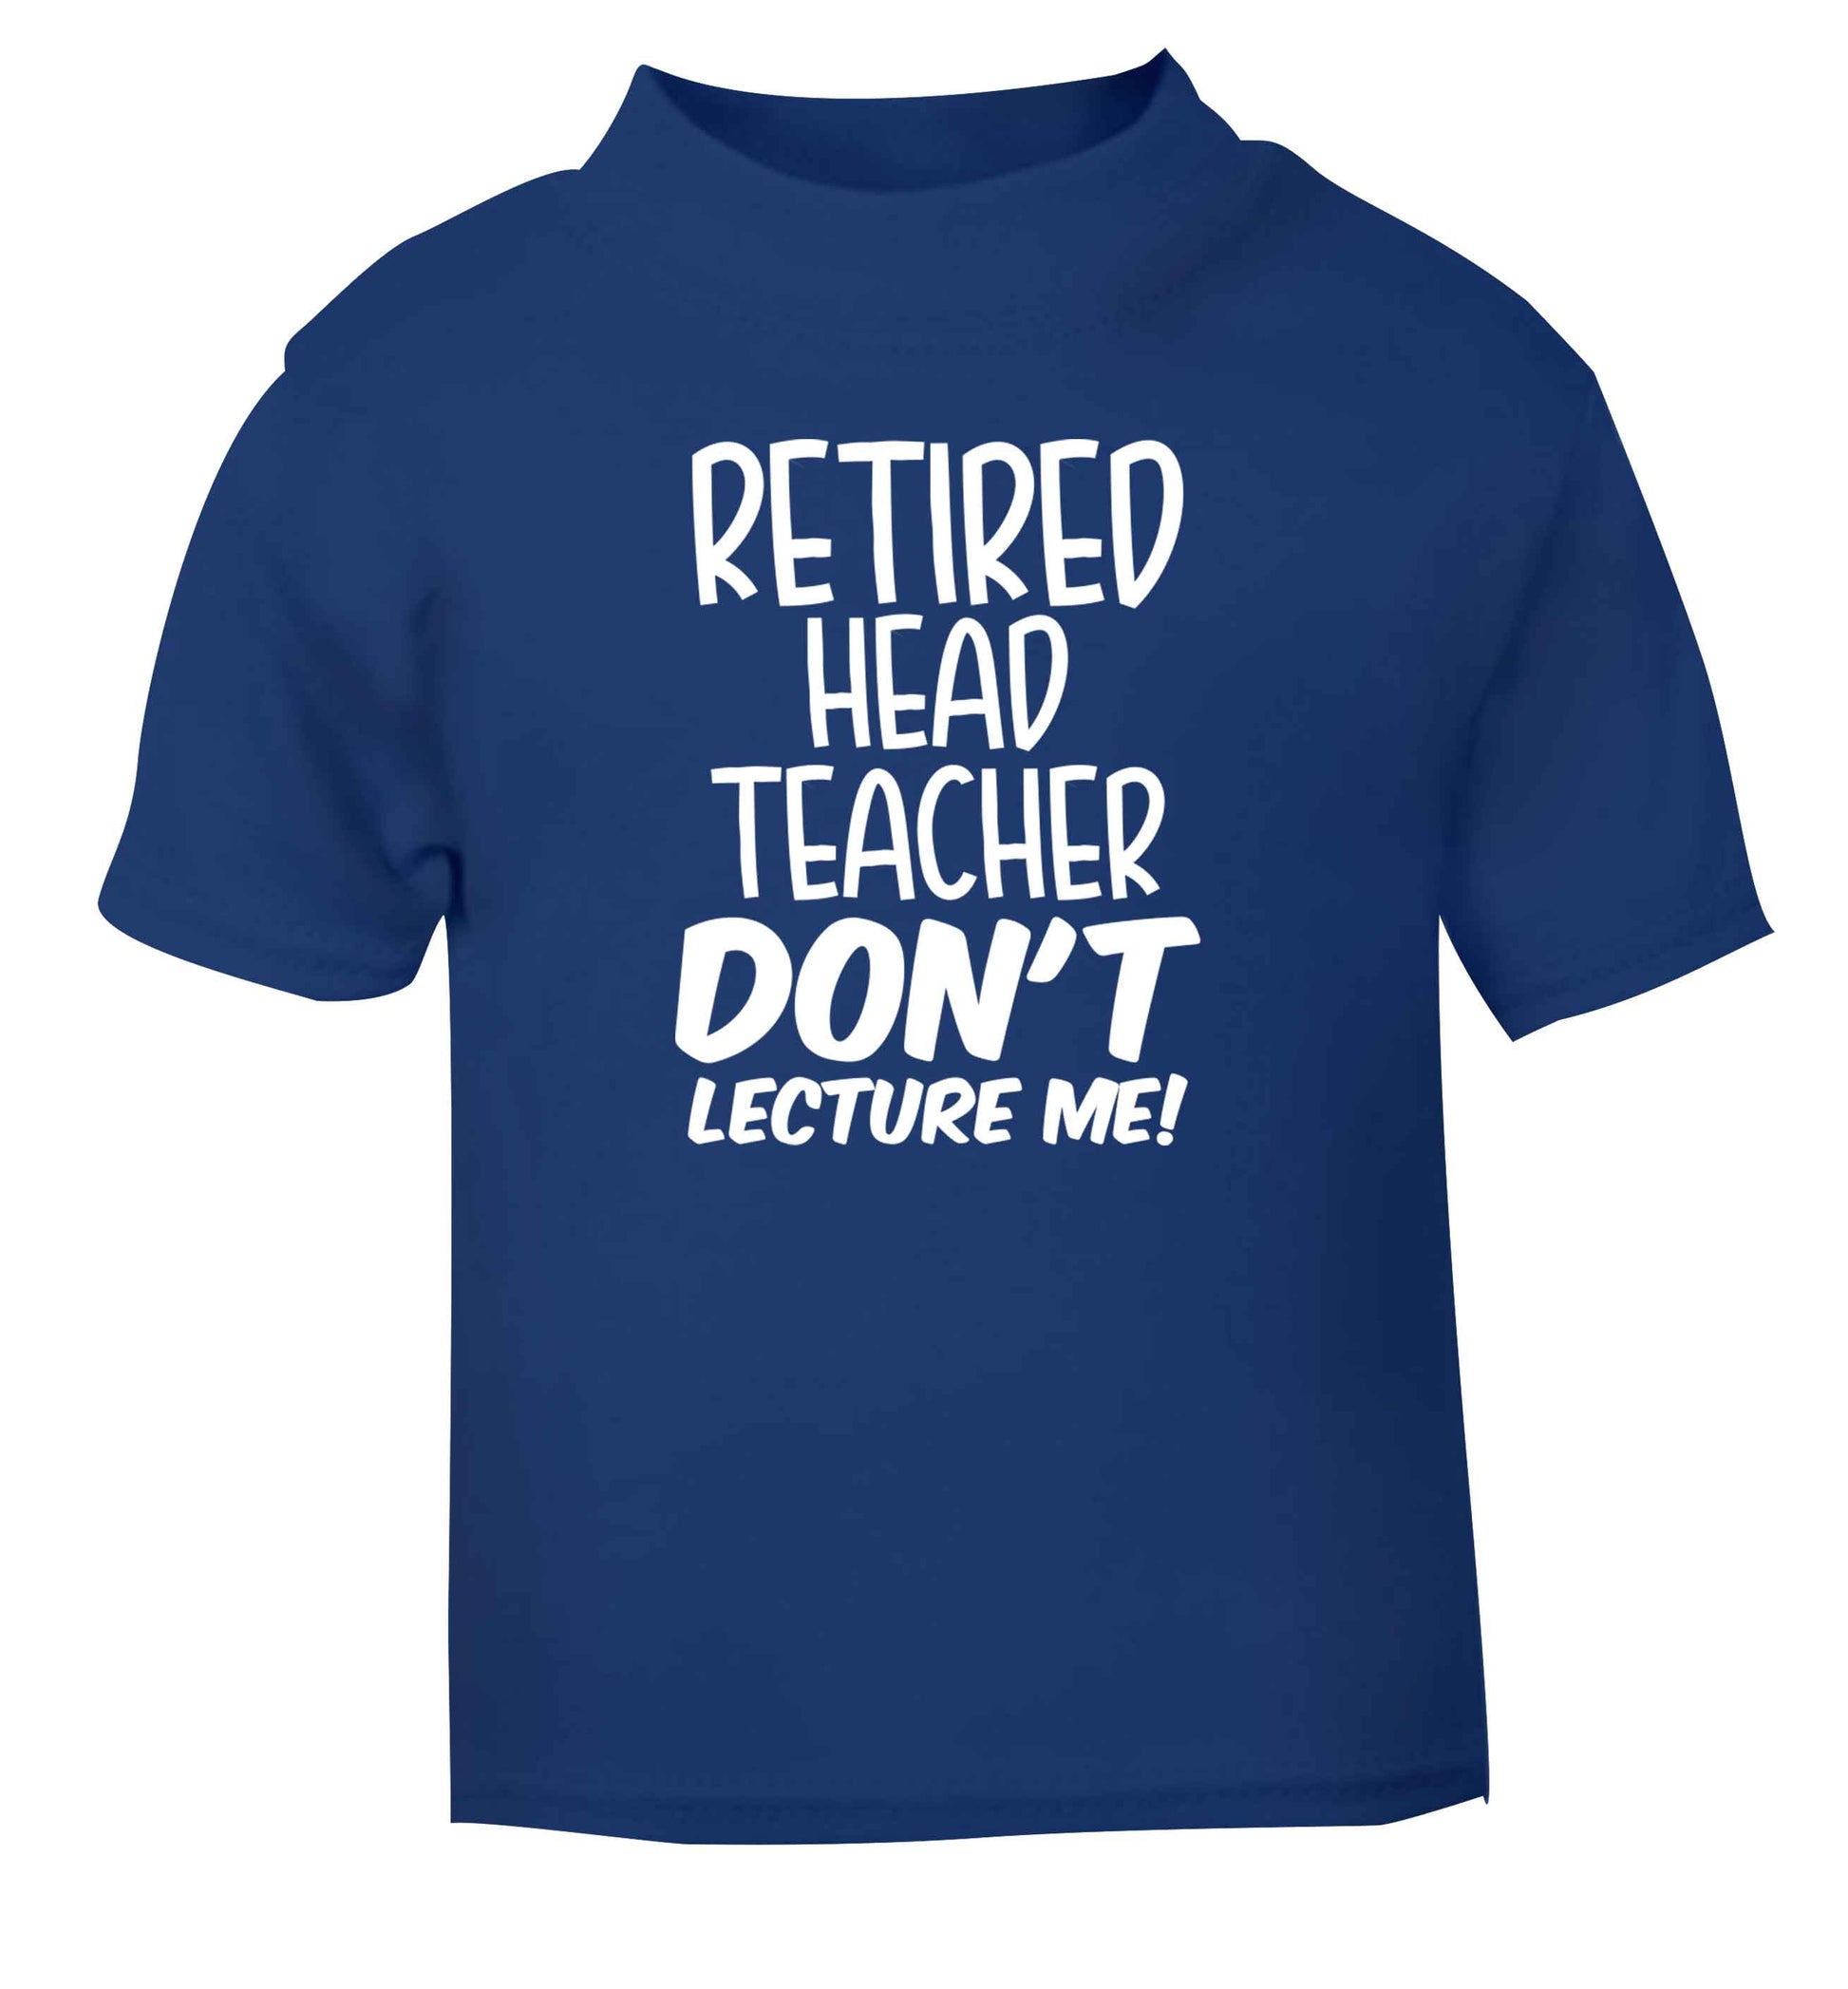 Retired head teacher don't lecture me! blue Baby Toddler Tshirt 2 Years